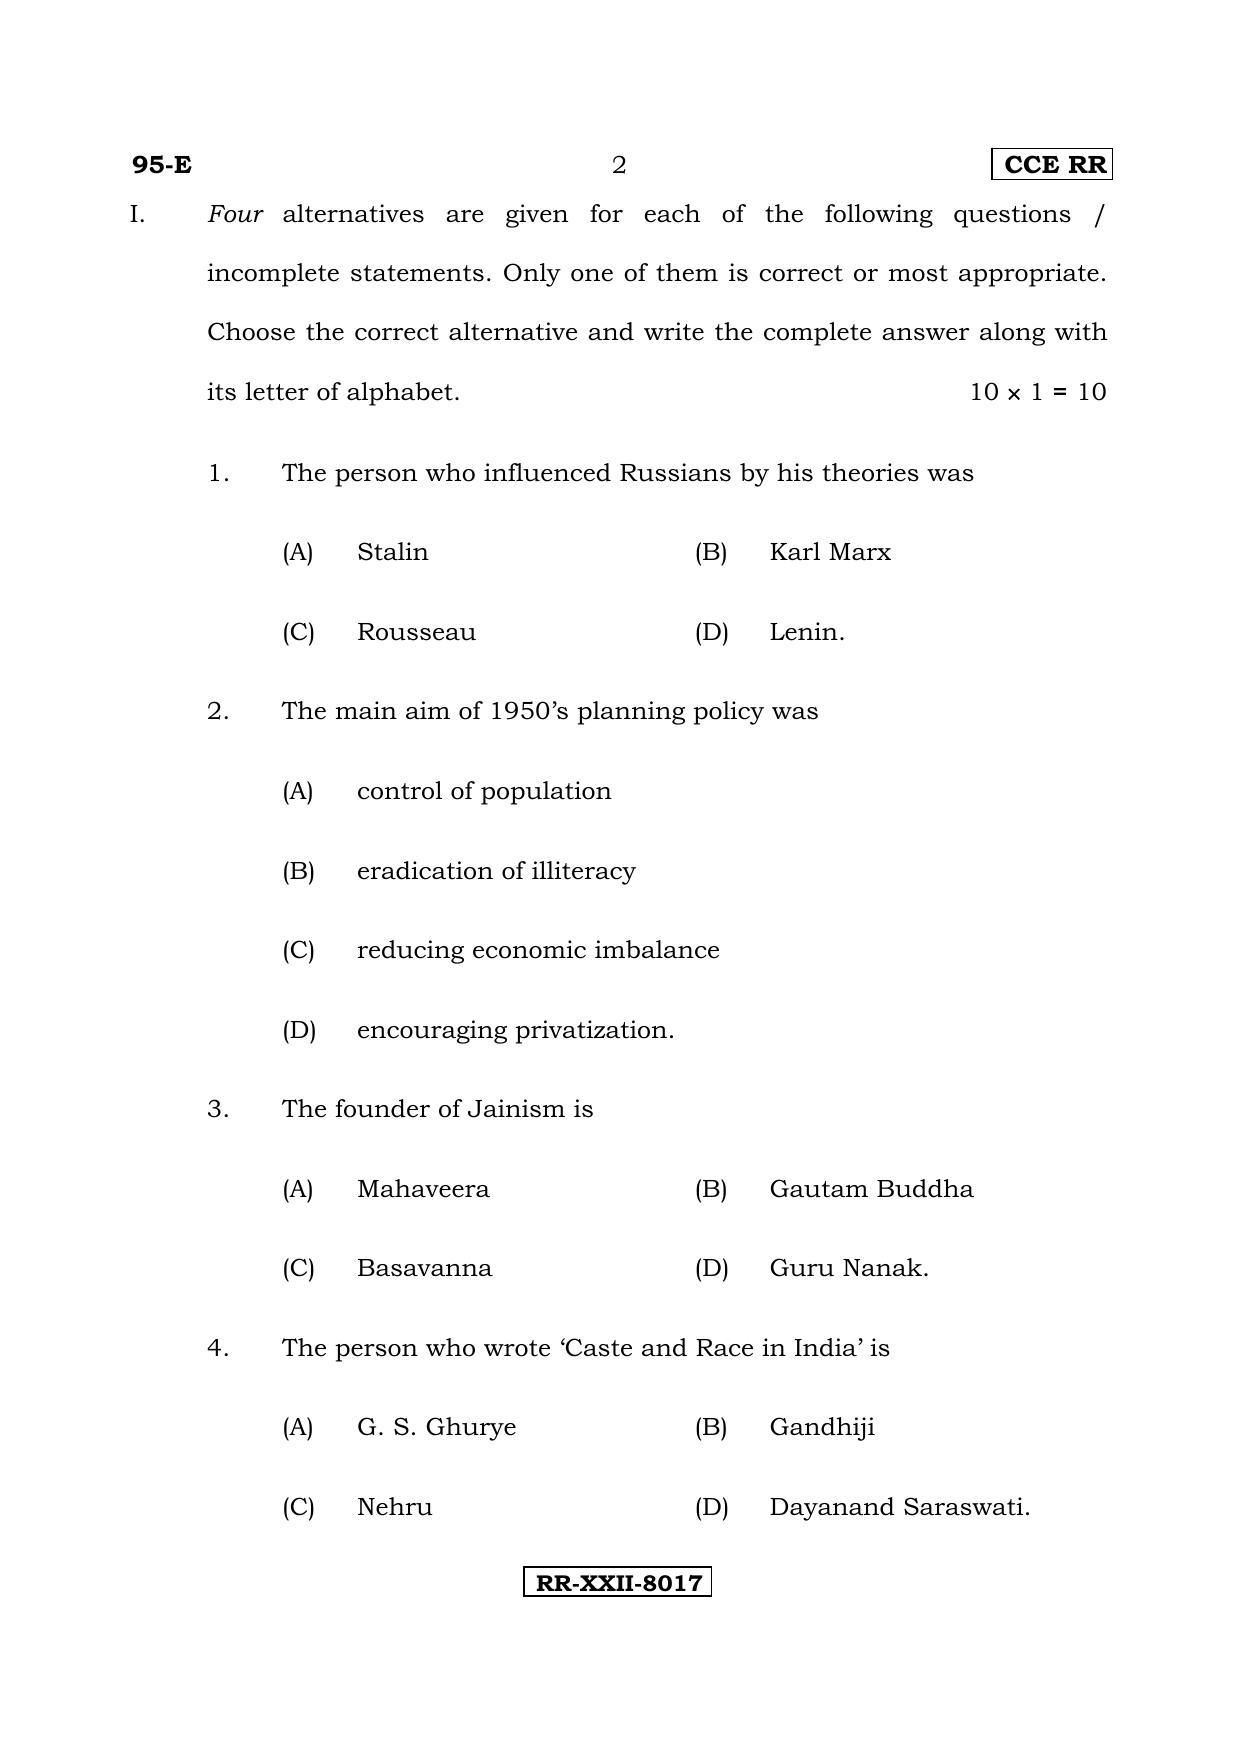 Karnataka SSLC SOCIOLOGY - ENGLISH (95-E CCE RR_sp1) (Supplementary) June 2017 Question Paper - Page 2